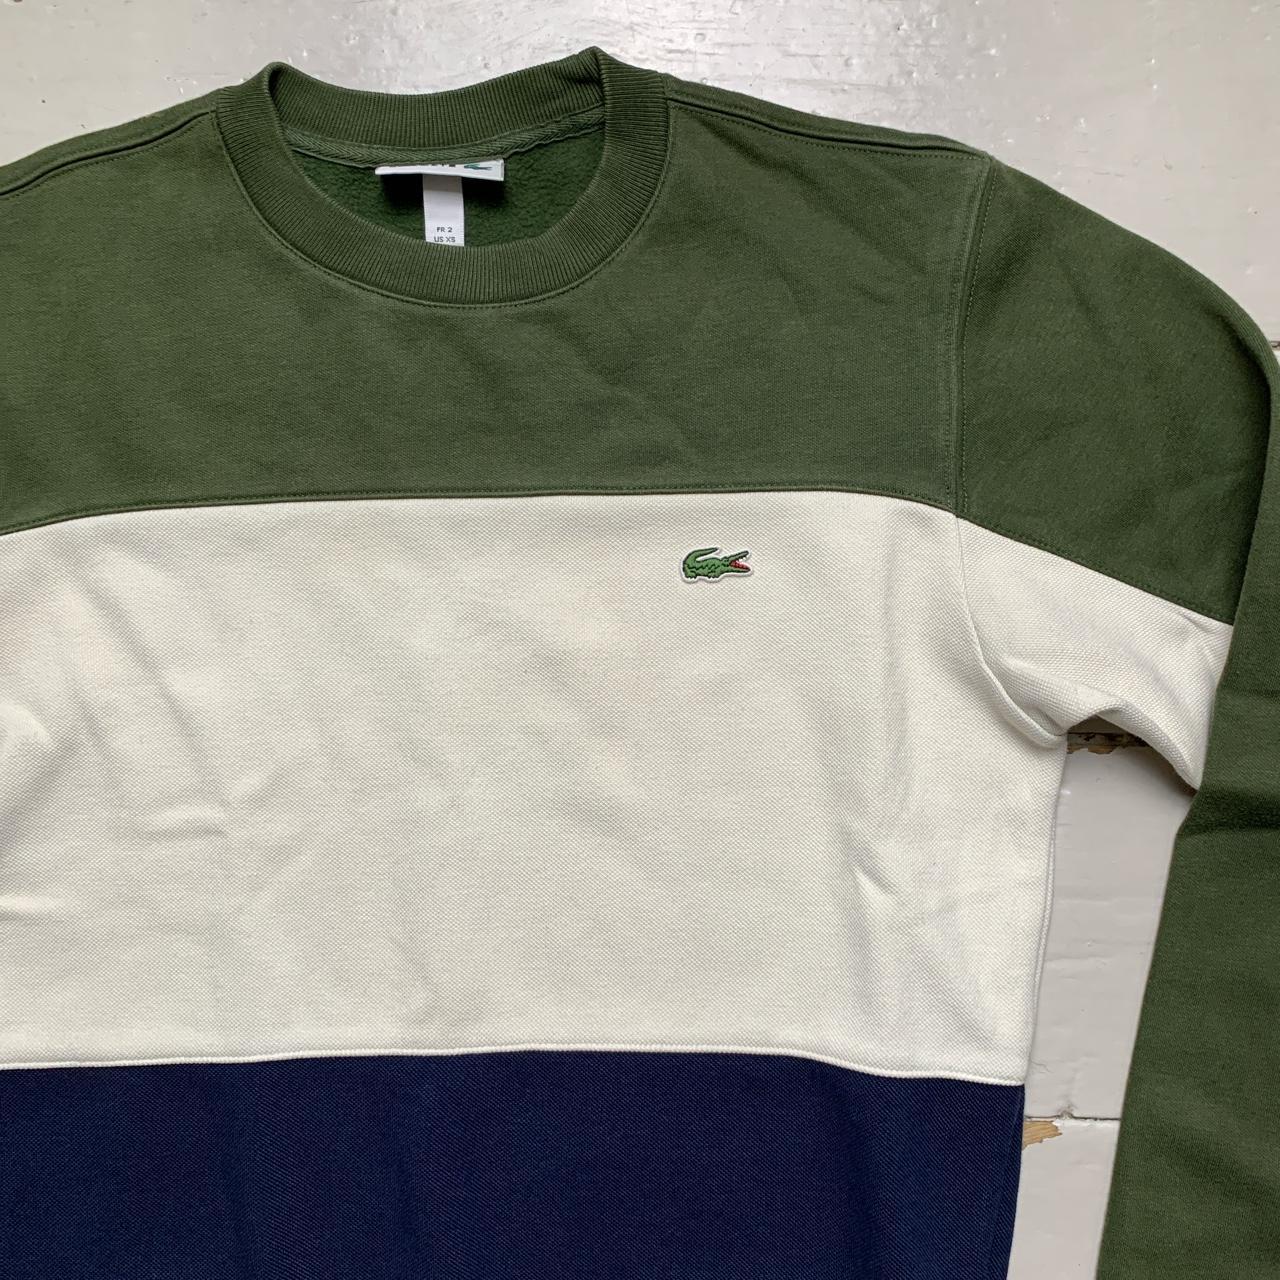 Lacoste Olive Green White and Navy Jumper